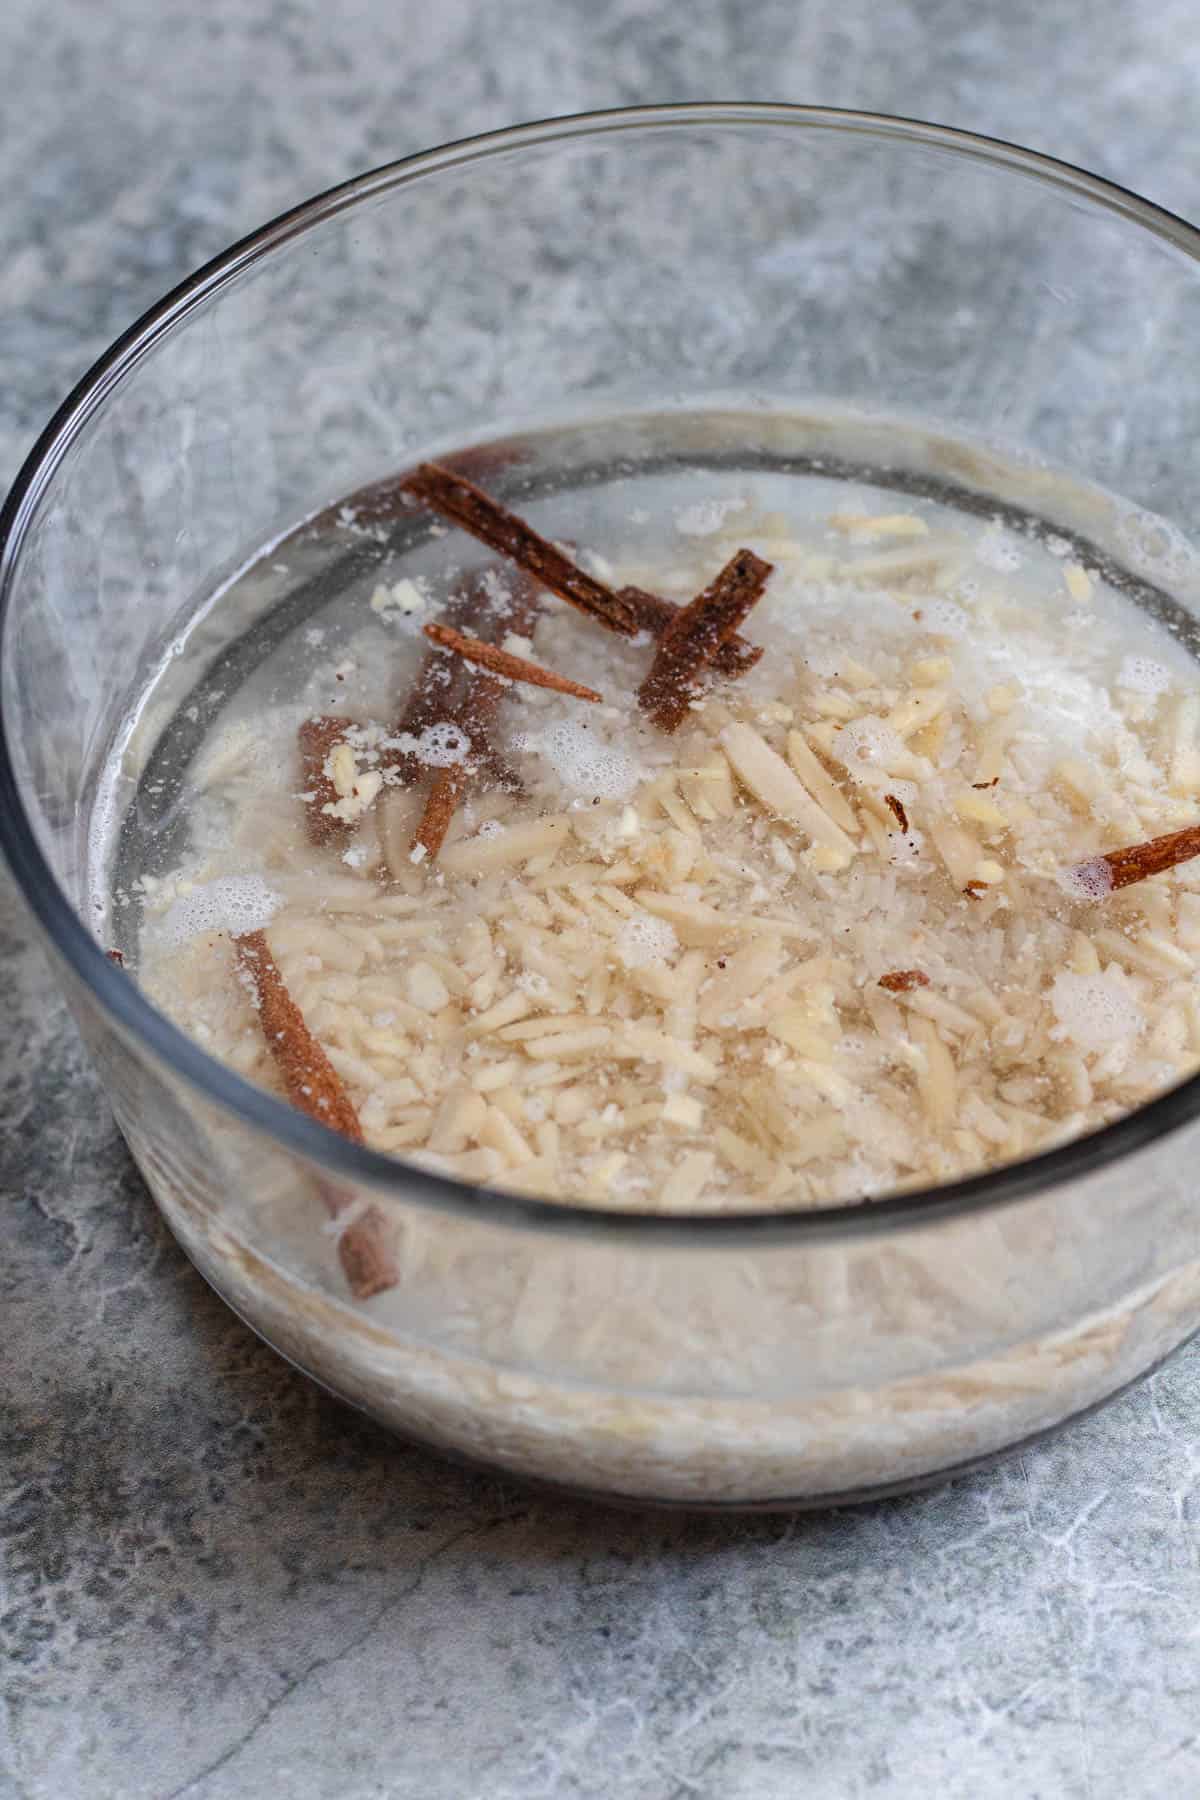 glass bowl with water, rice, slivered almonds, and cinnamon sticks on a light colored background